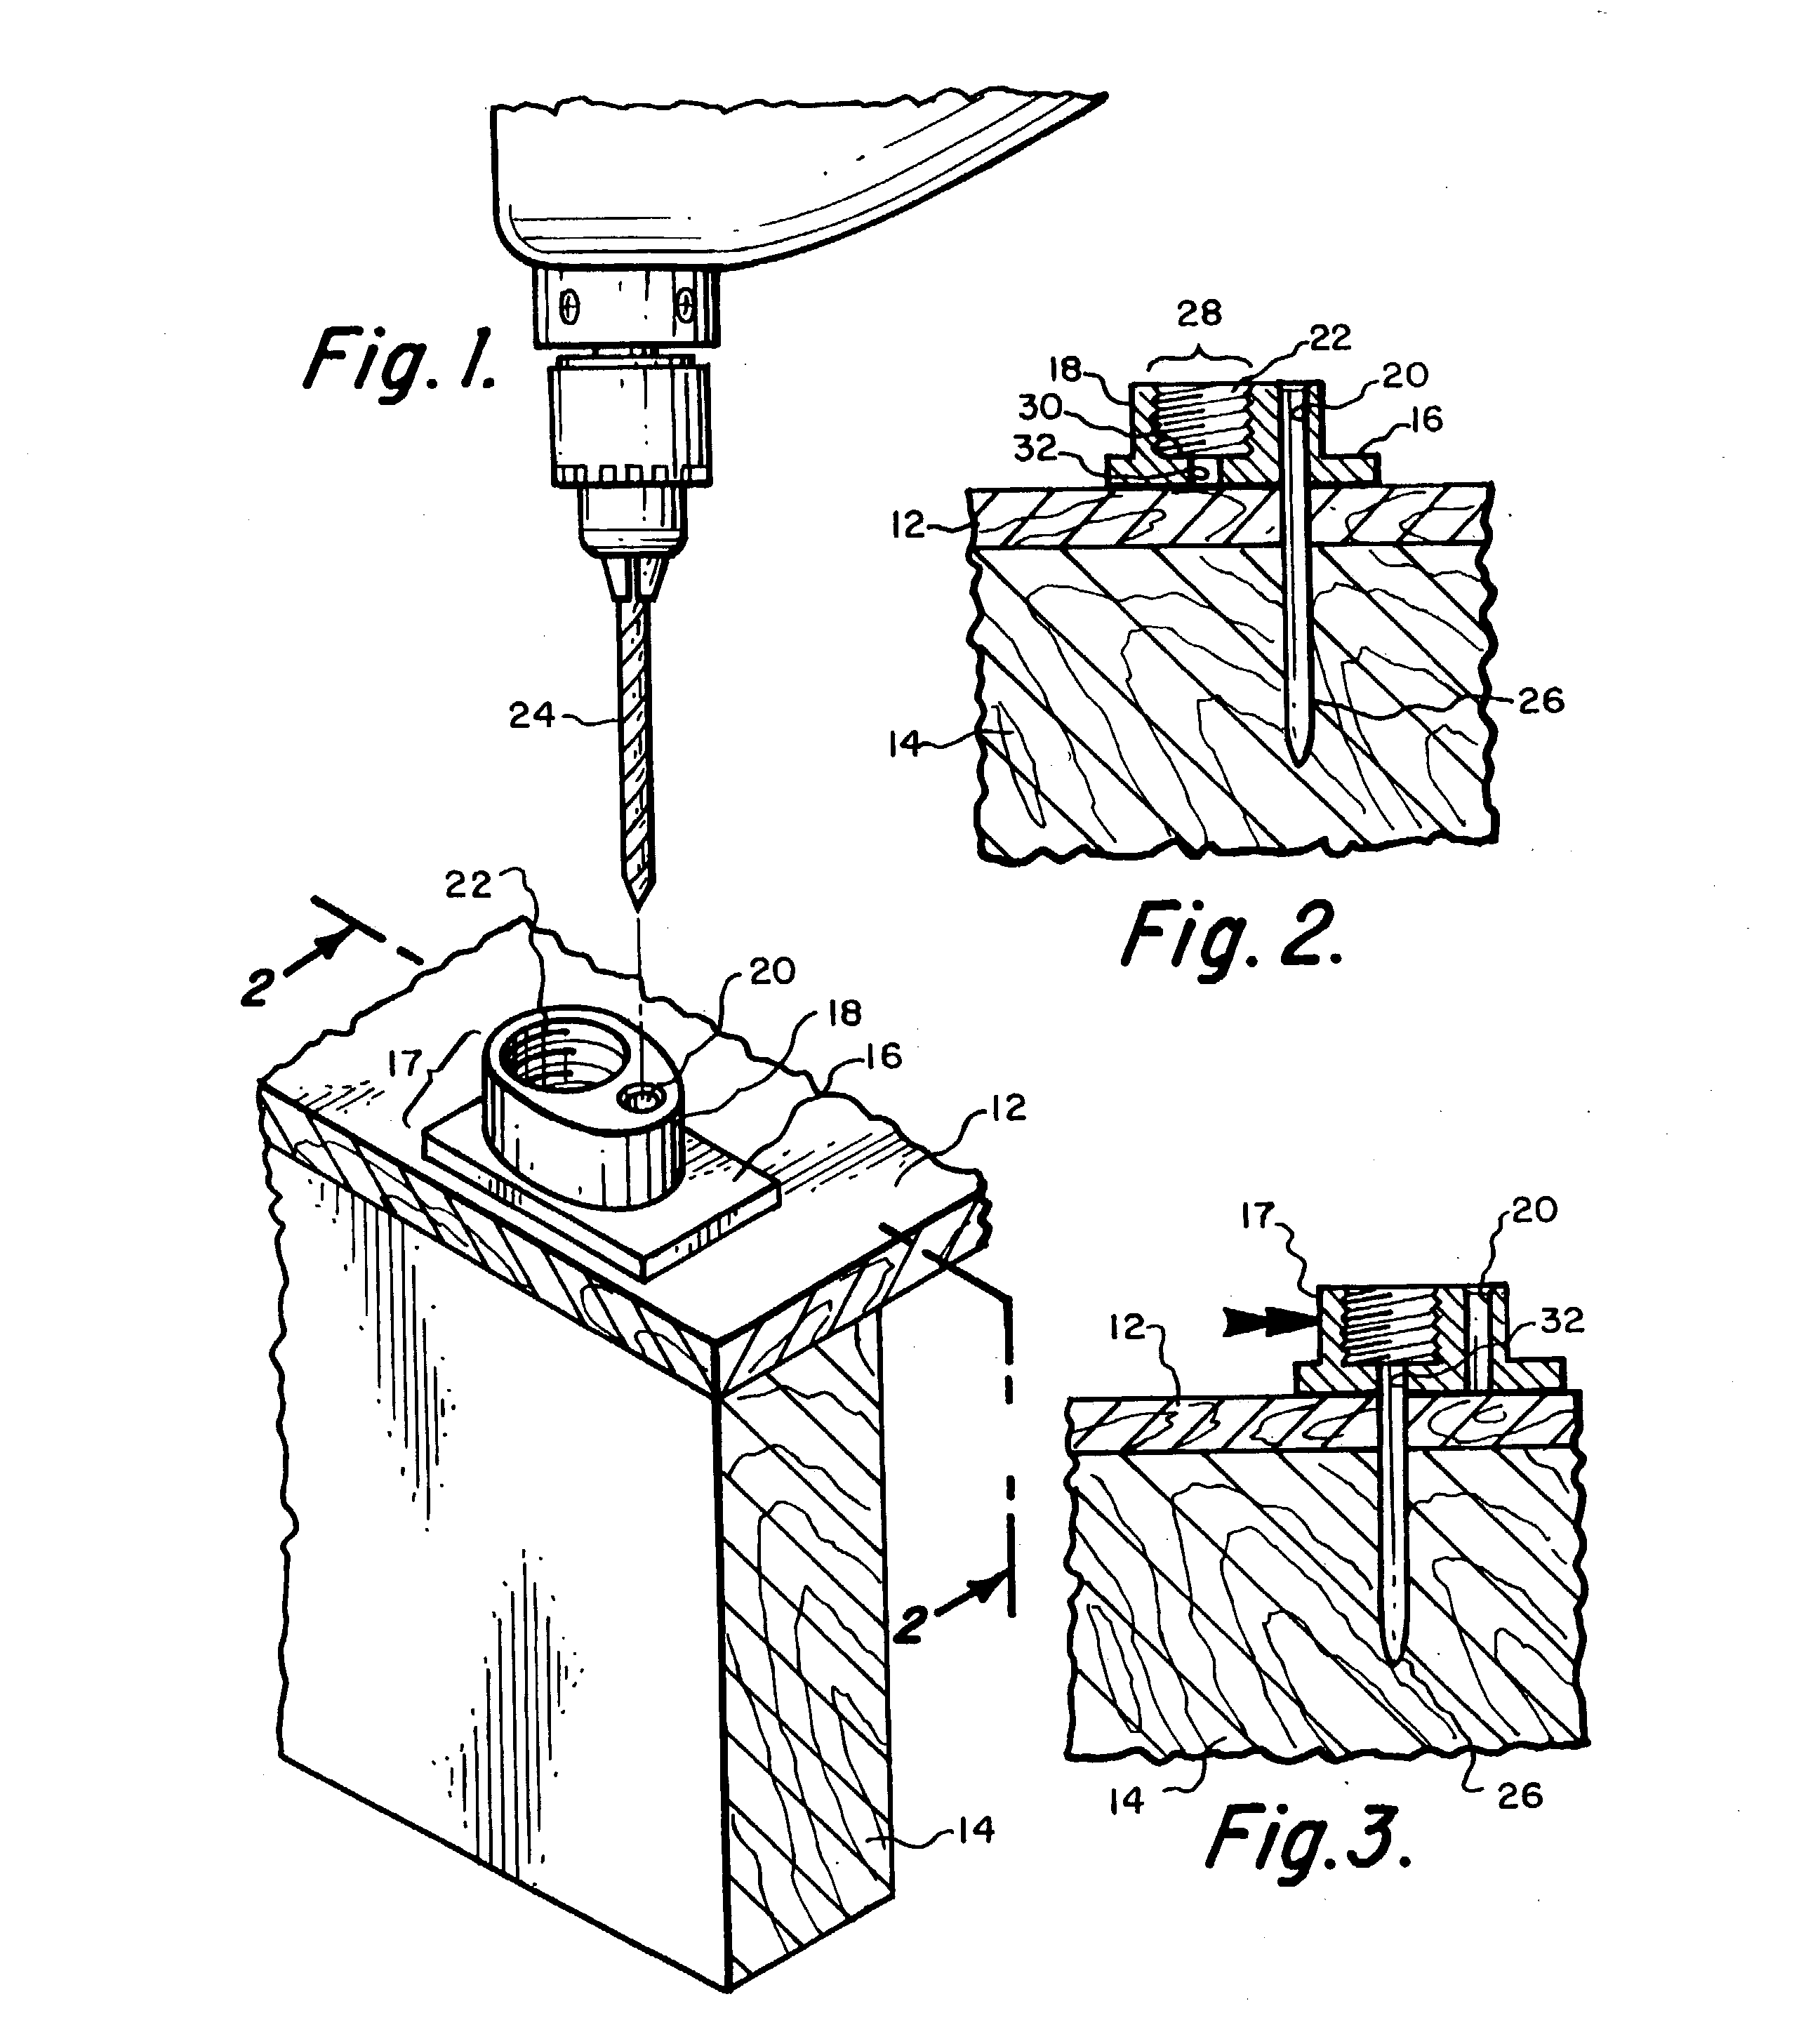 Mounting system for supporting objects